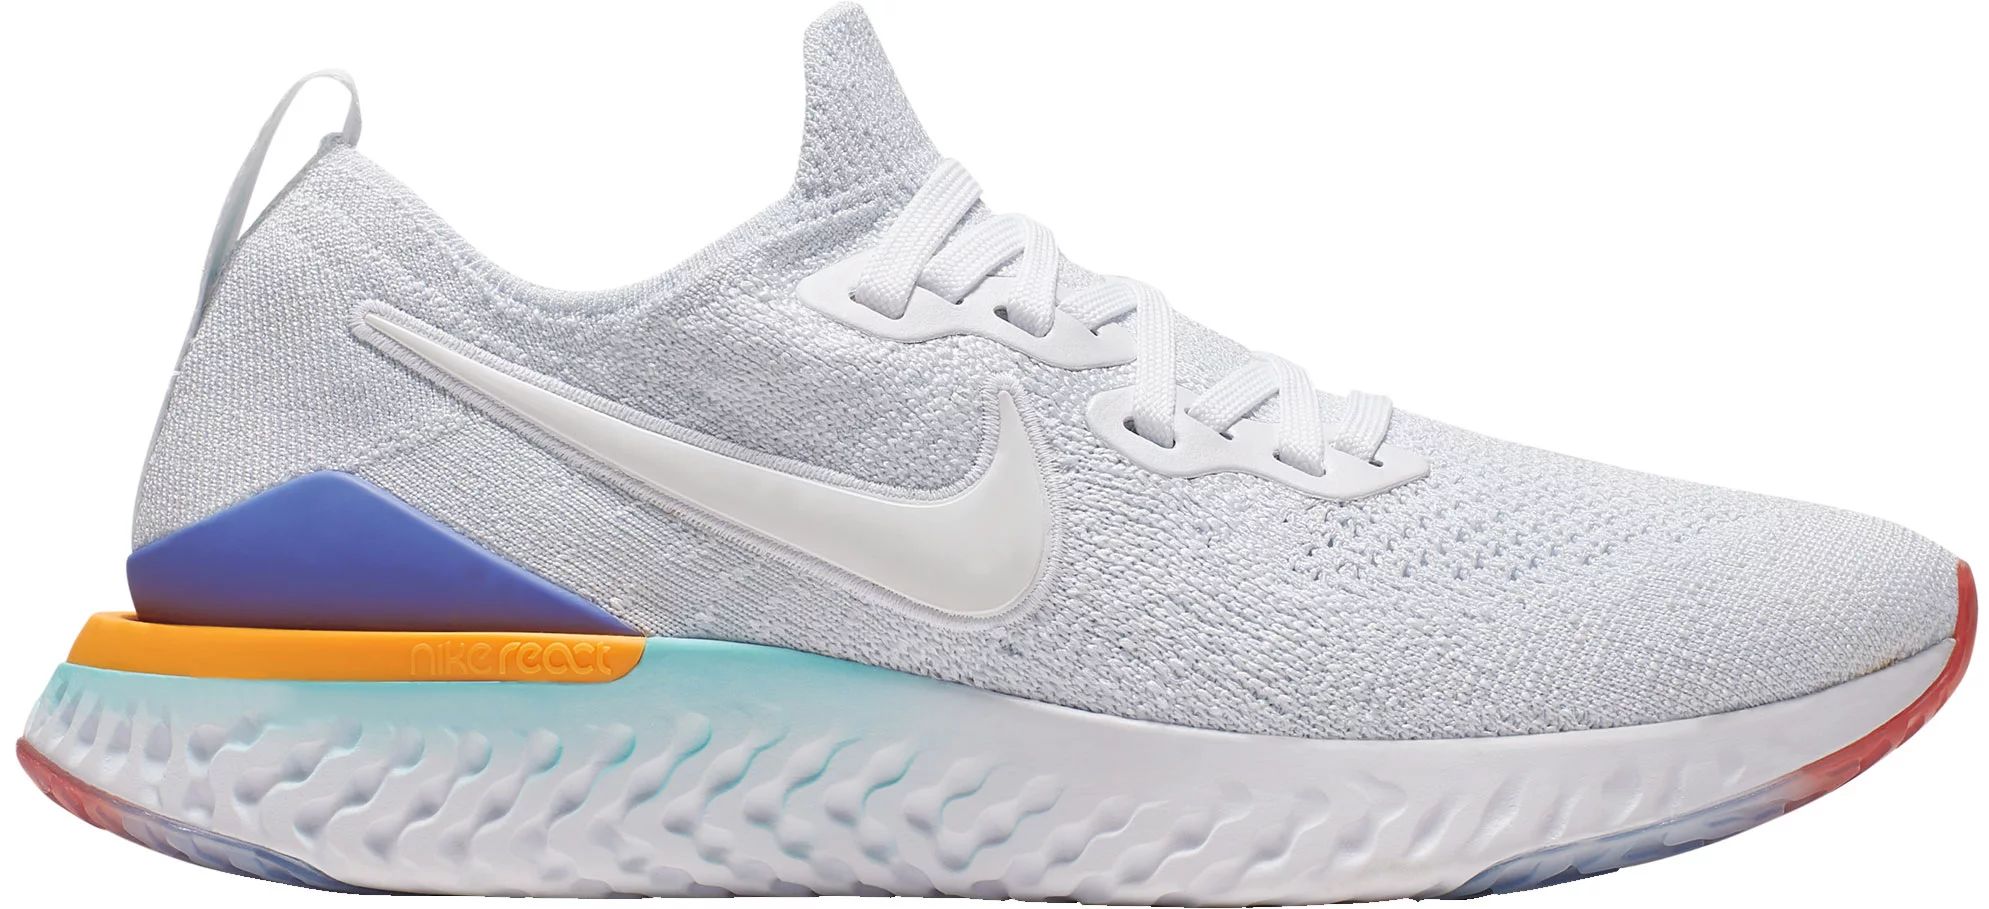 Women's Nike Epic React Flyknit 2 Running Shoes, Size: 6.0, White | Dick's Sporting Goods